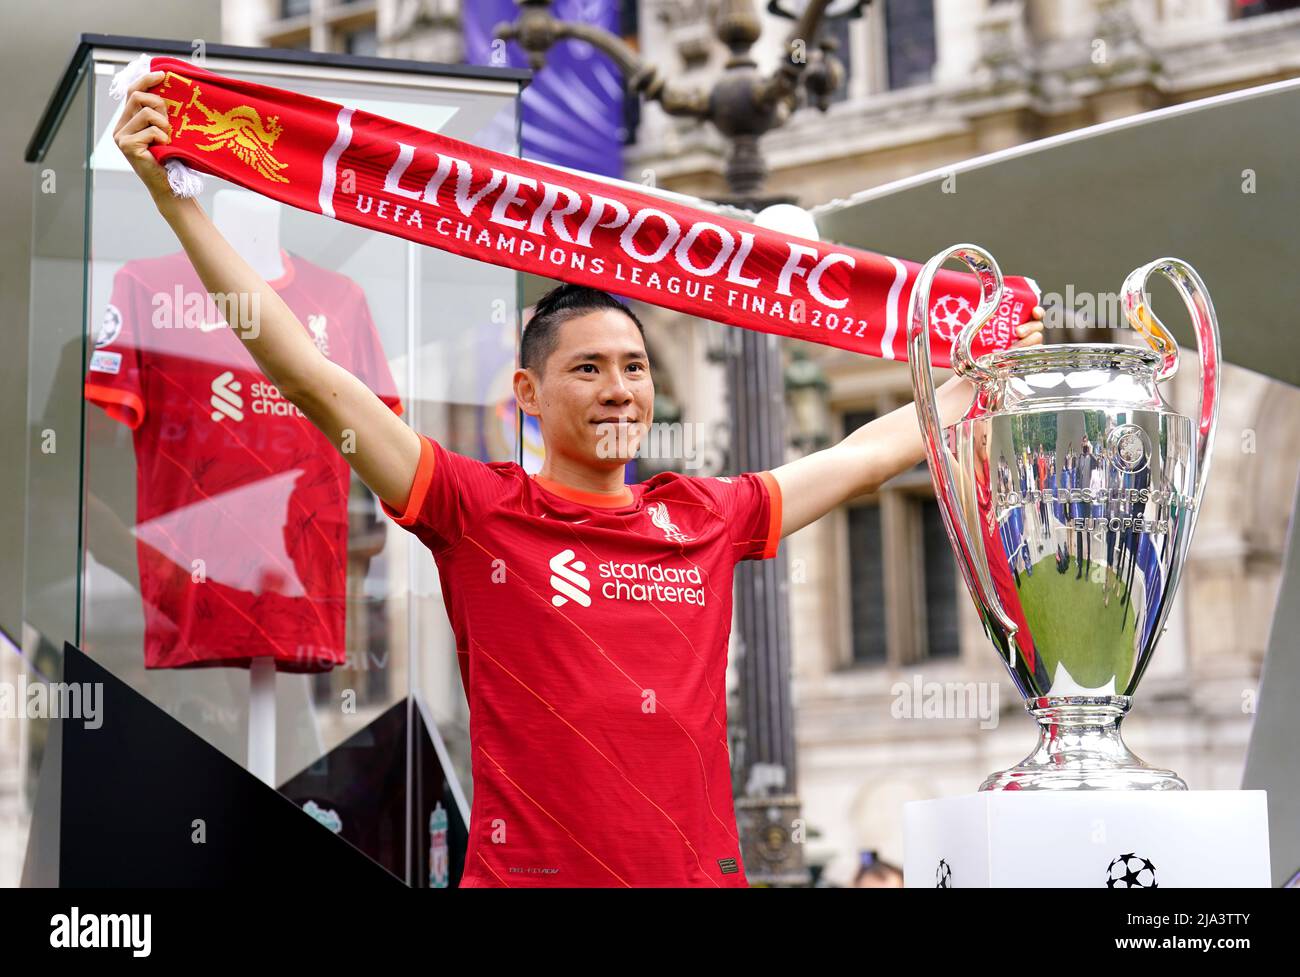 A Liverpool fan poses next to the UEFA Champions League trophy at the Trophy Experience at The Place de l'Hotel de Ville in Paris ahead of Saturday's UEFA Champions League Final at the Stade de France, Paris. Picture date: Friday May 27, 2022. Stock Photo